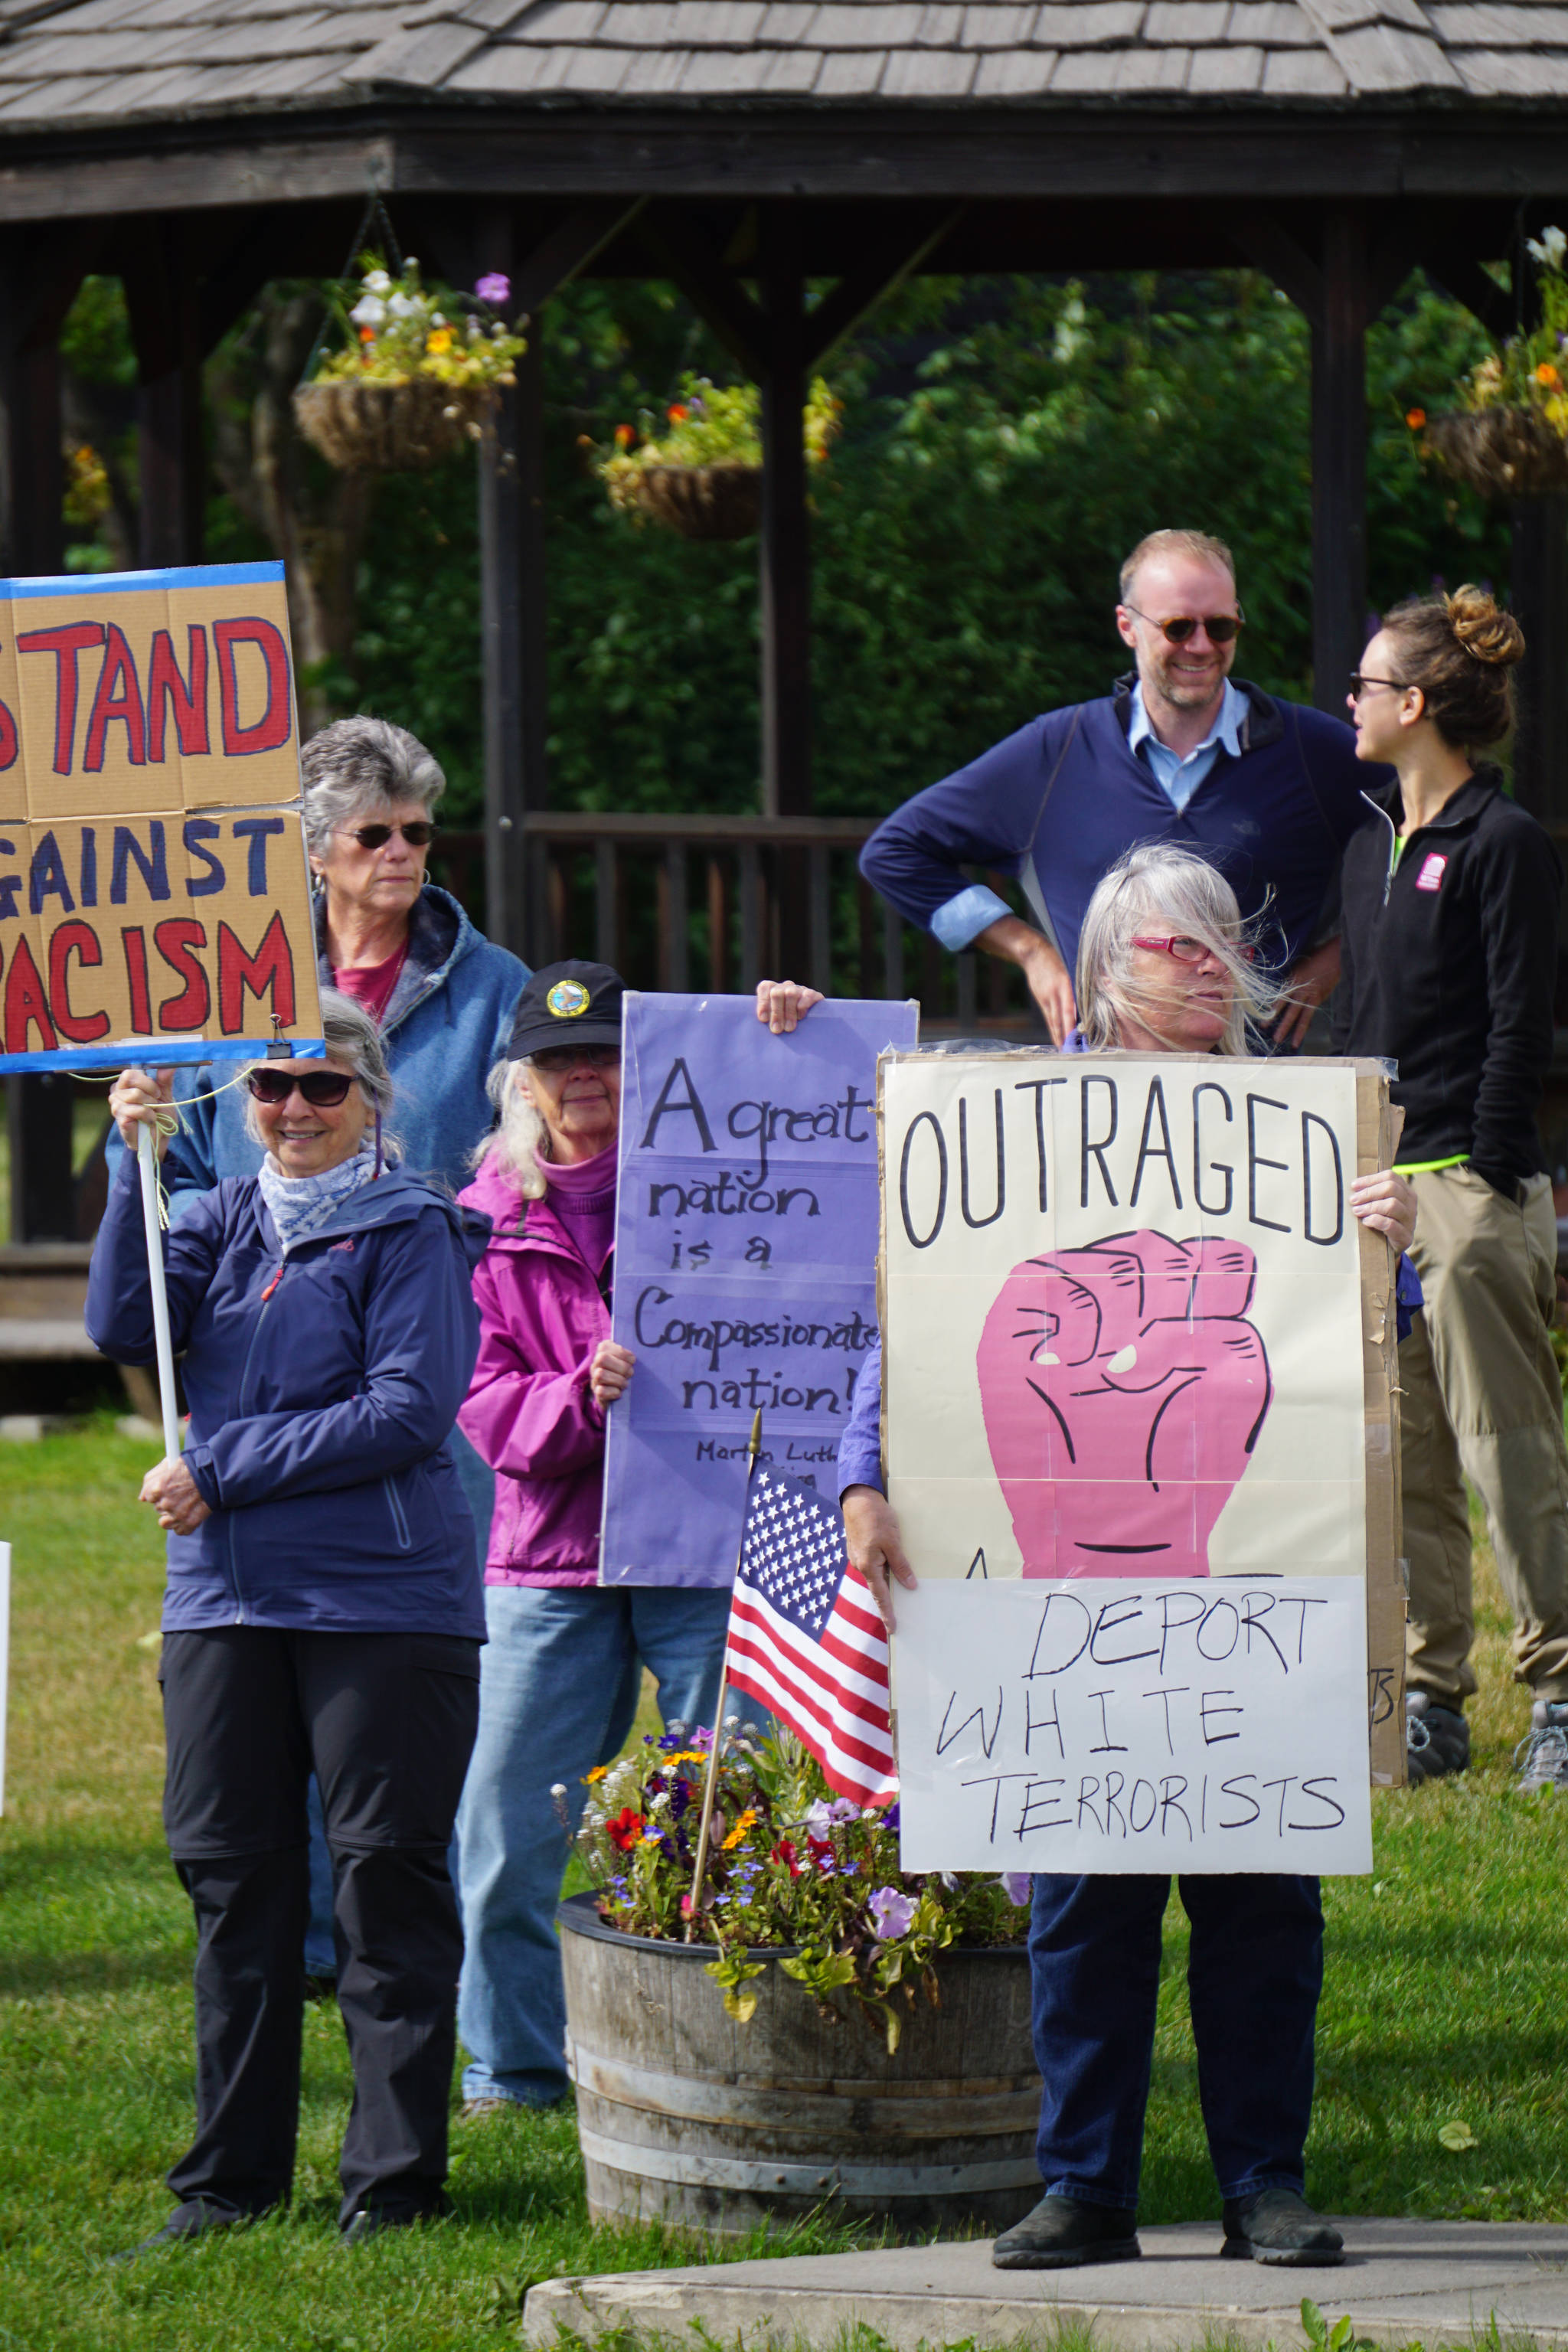 People demonstrating against the events of Charlottesville, Va., and other white supremacist rallies stand up against racism at WKFL Park in Homer on Sunday afternoon. About 50 people attended the one-hour event held from 3-4 p.m. Sunday, Aug. 13, 2017 in Homer, Alaska. (Photo by Michael Armstrong, Homer News)